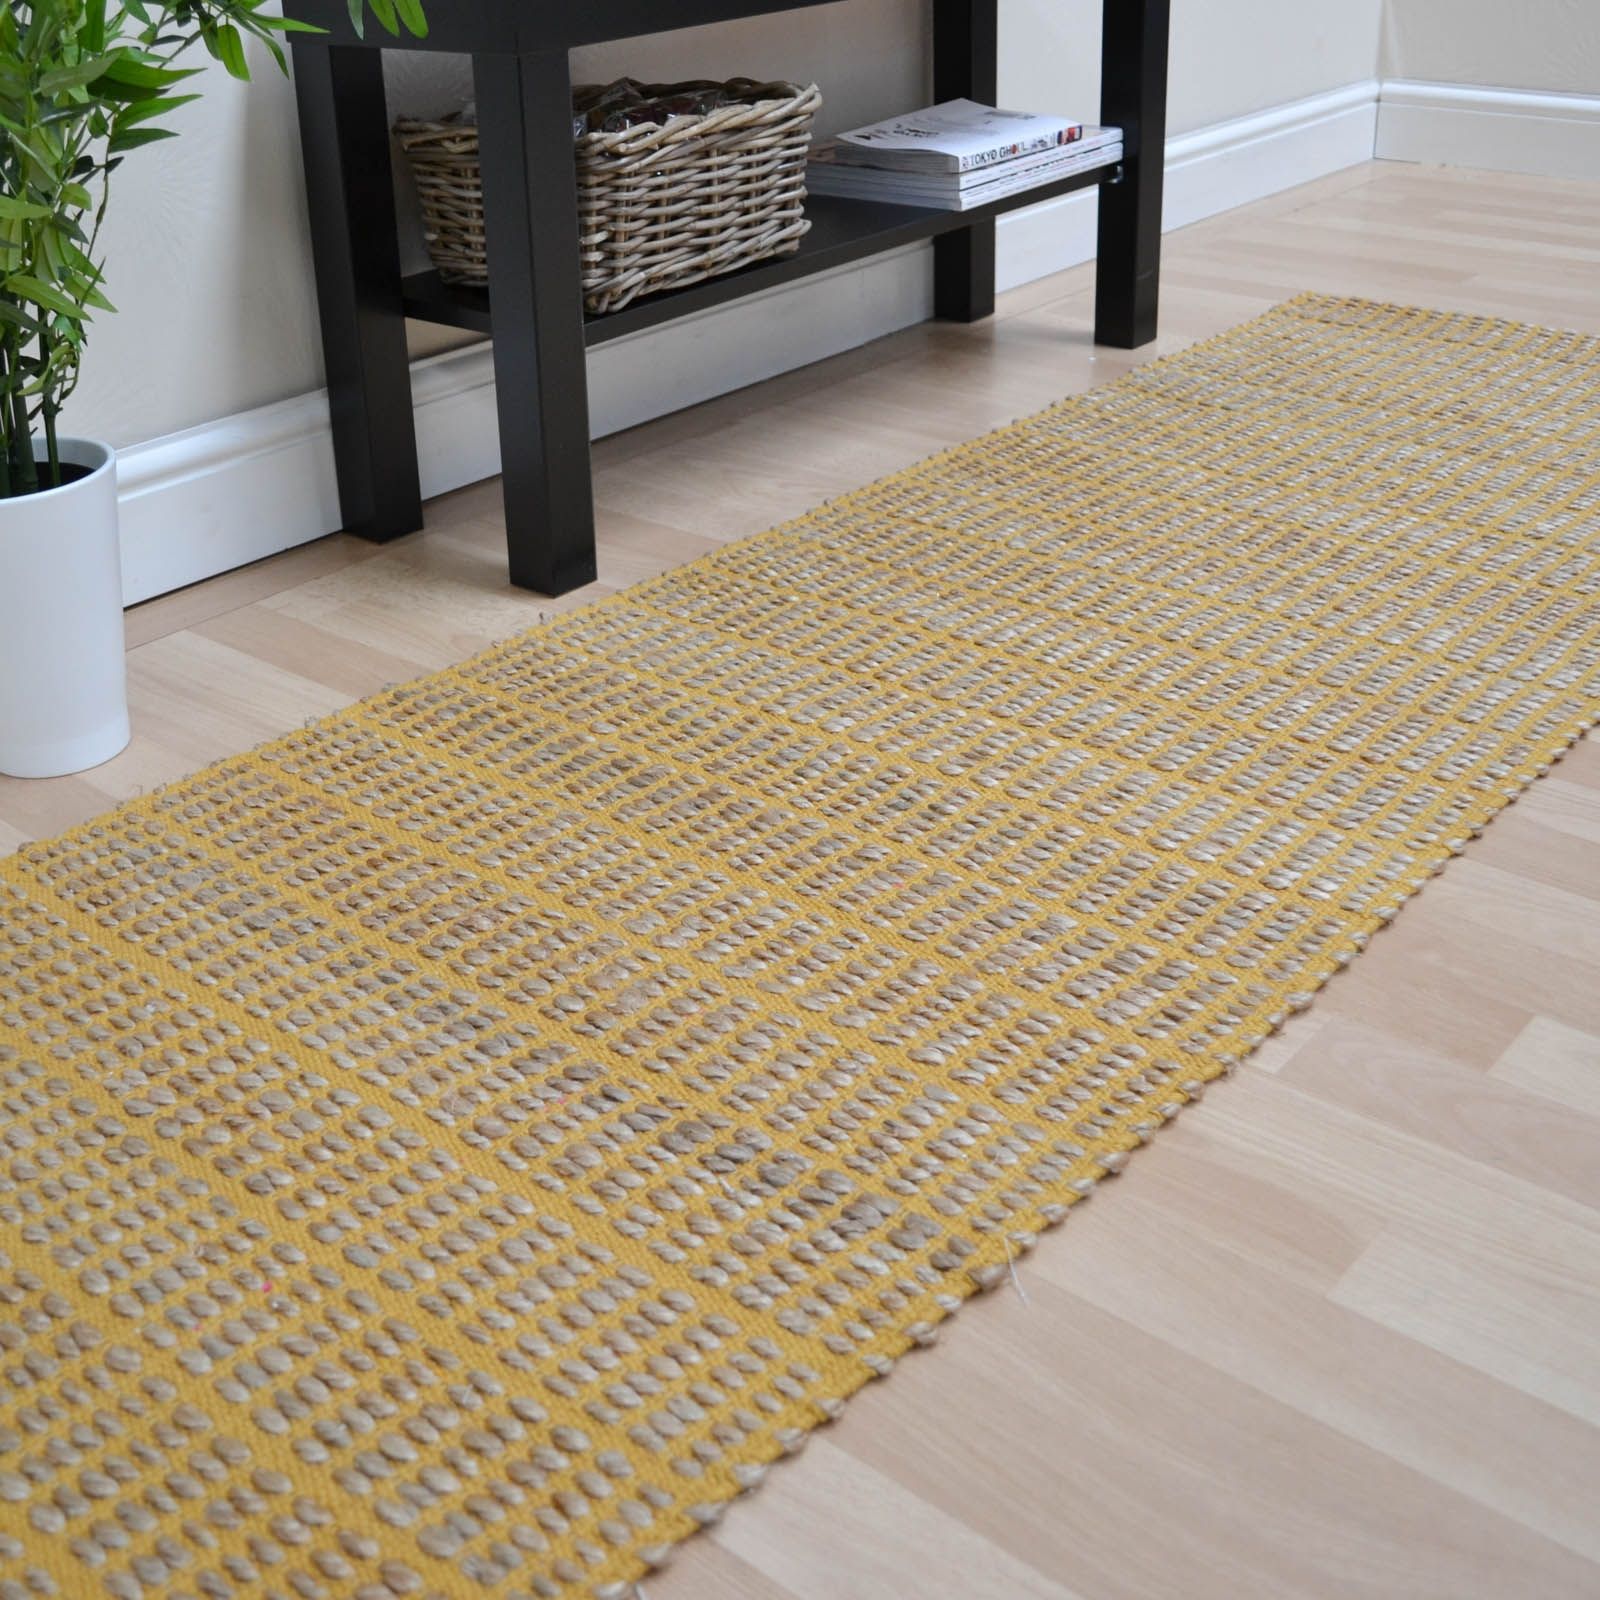 Ranger Hallway Runners In Mustard Free Uk Delivery The Rug Seller Pertaining To Hallway Runners By The Metre (View 13 of 20)